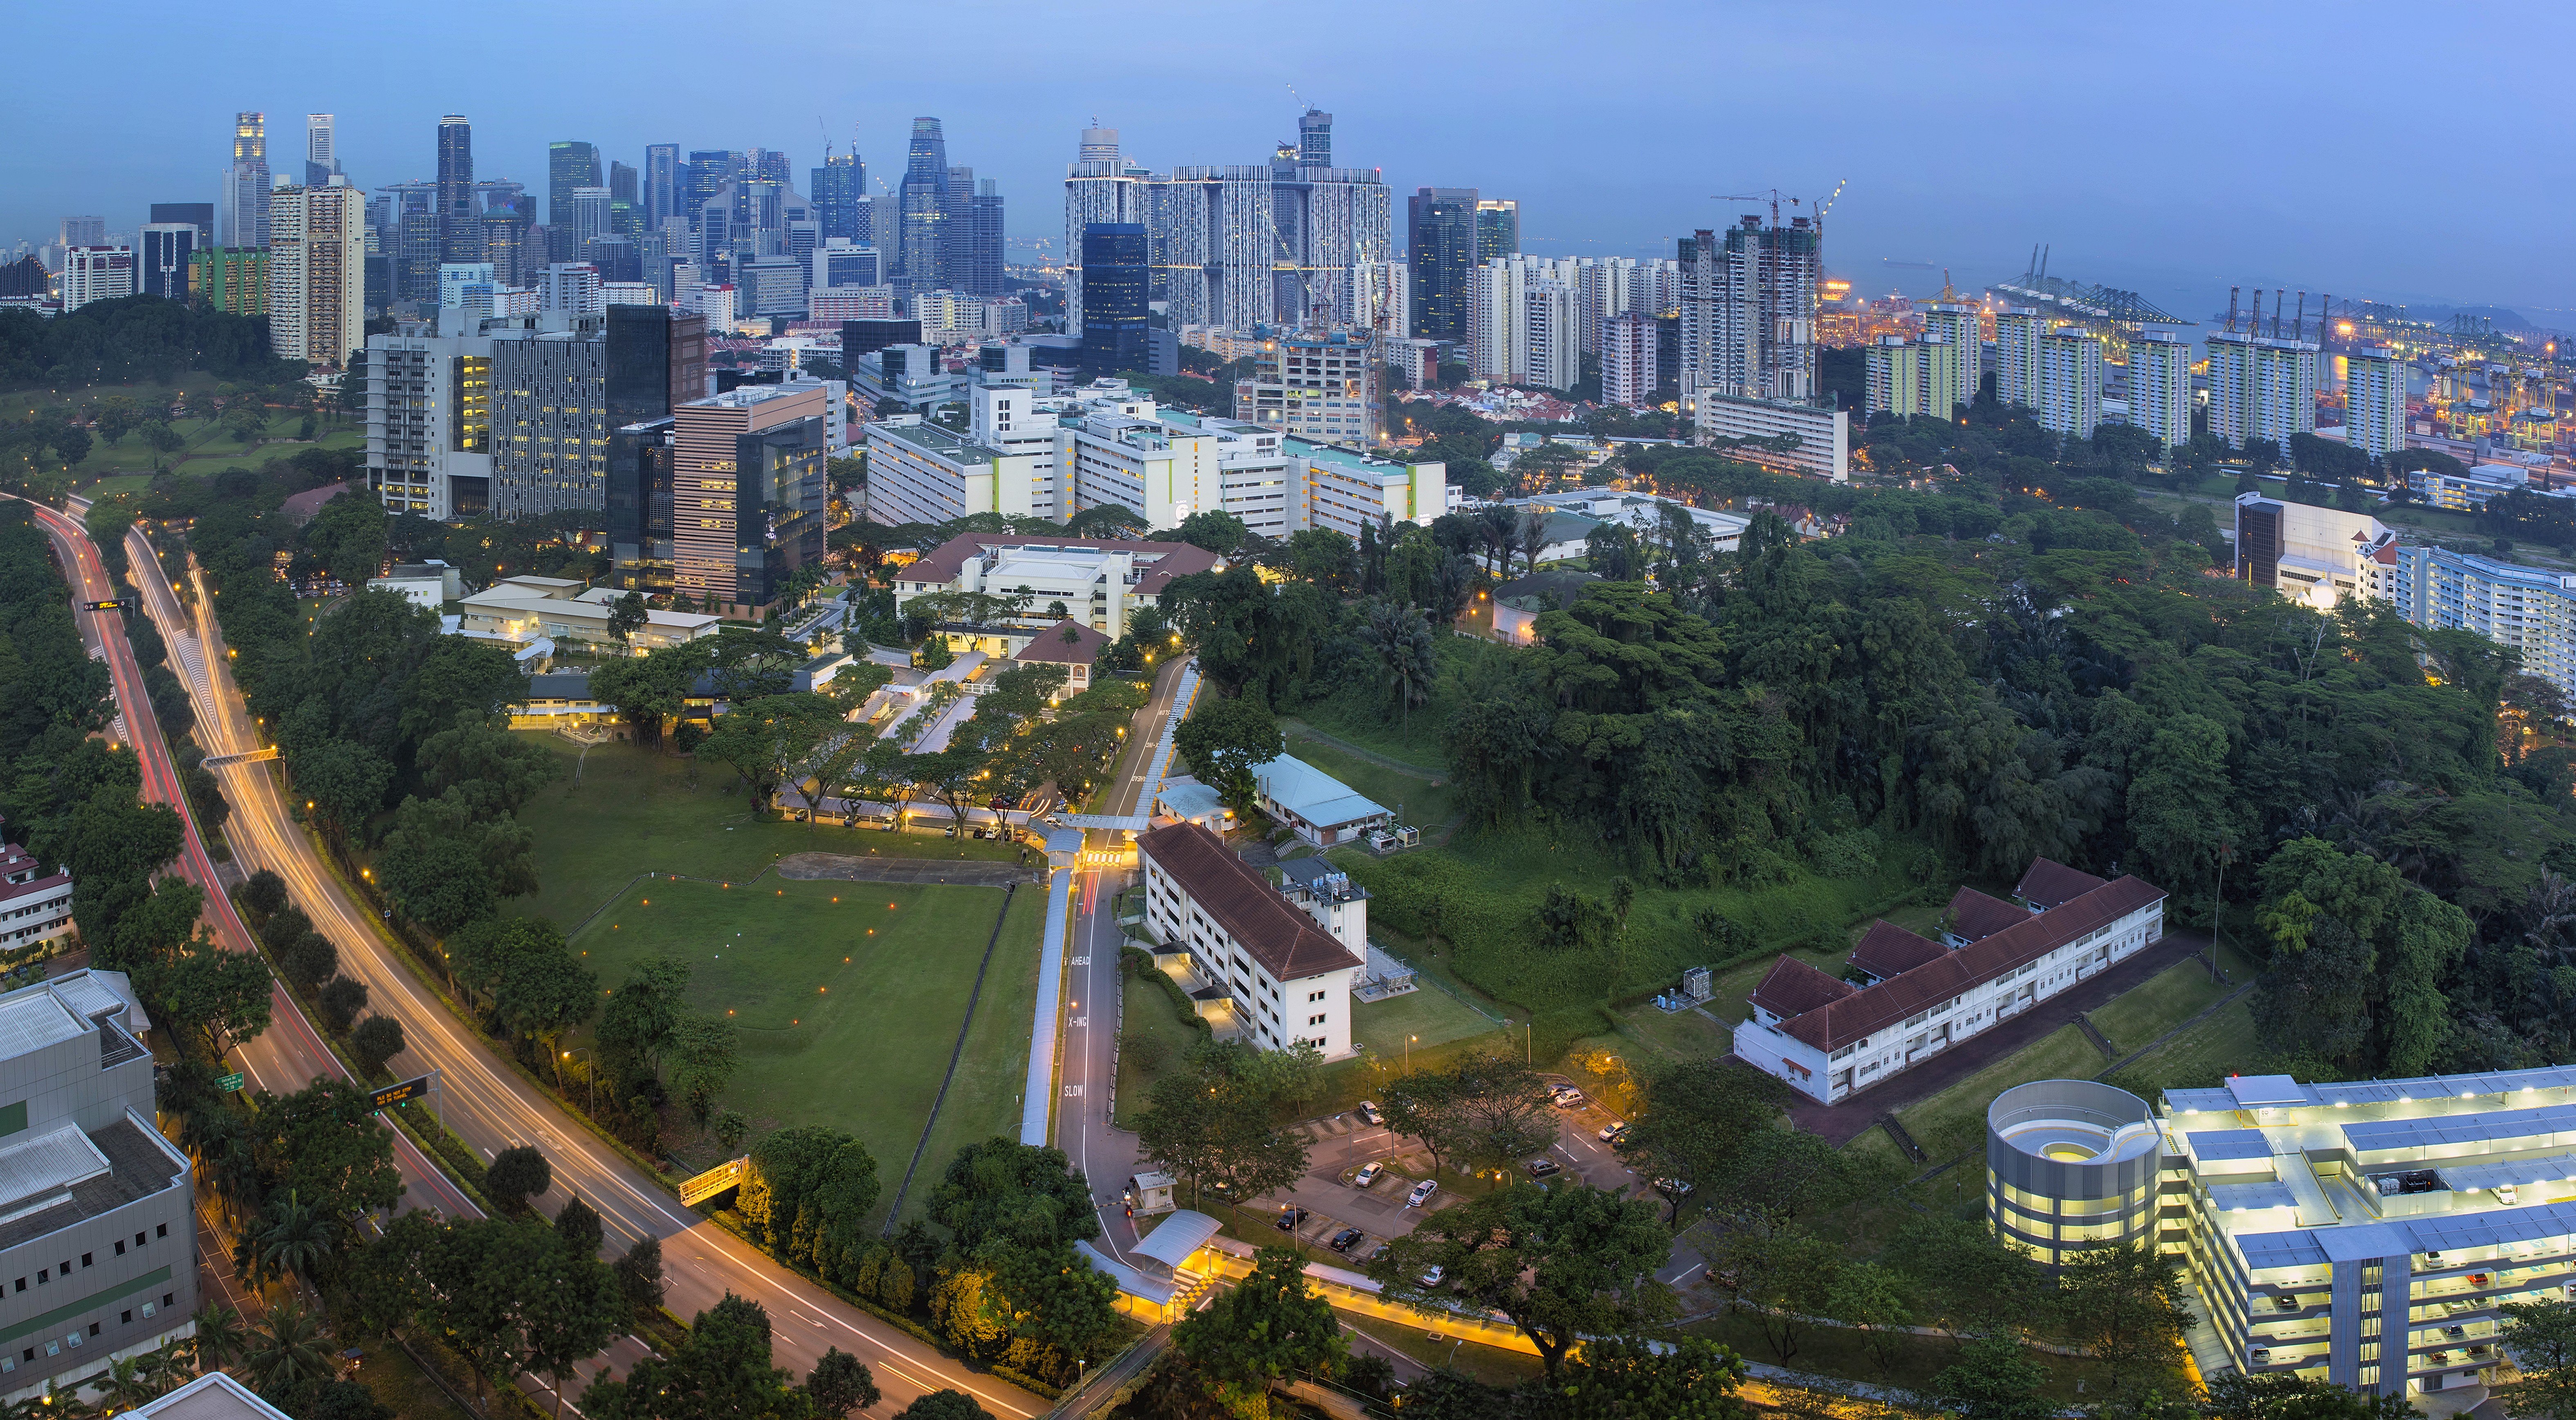 Singapore’s skyline with the Bukit Timah Central Expressway. Photo: Shutterstock